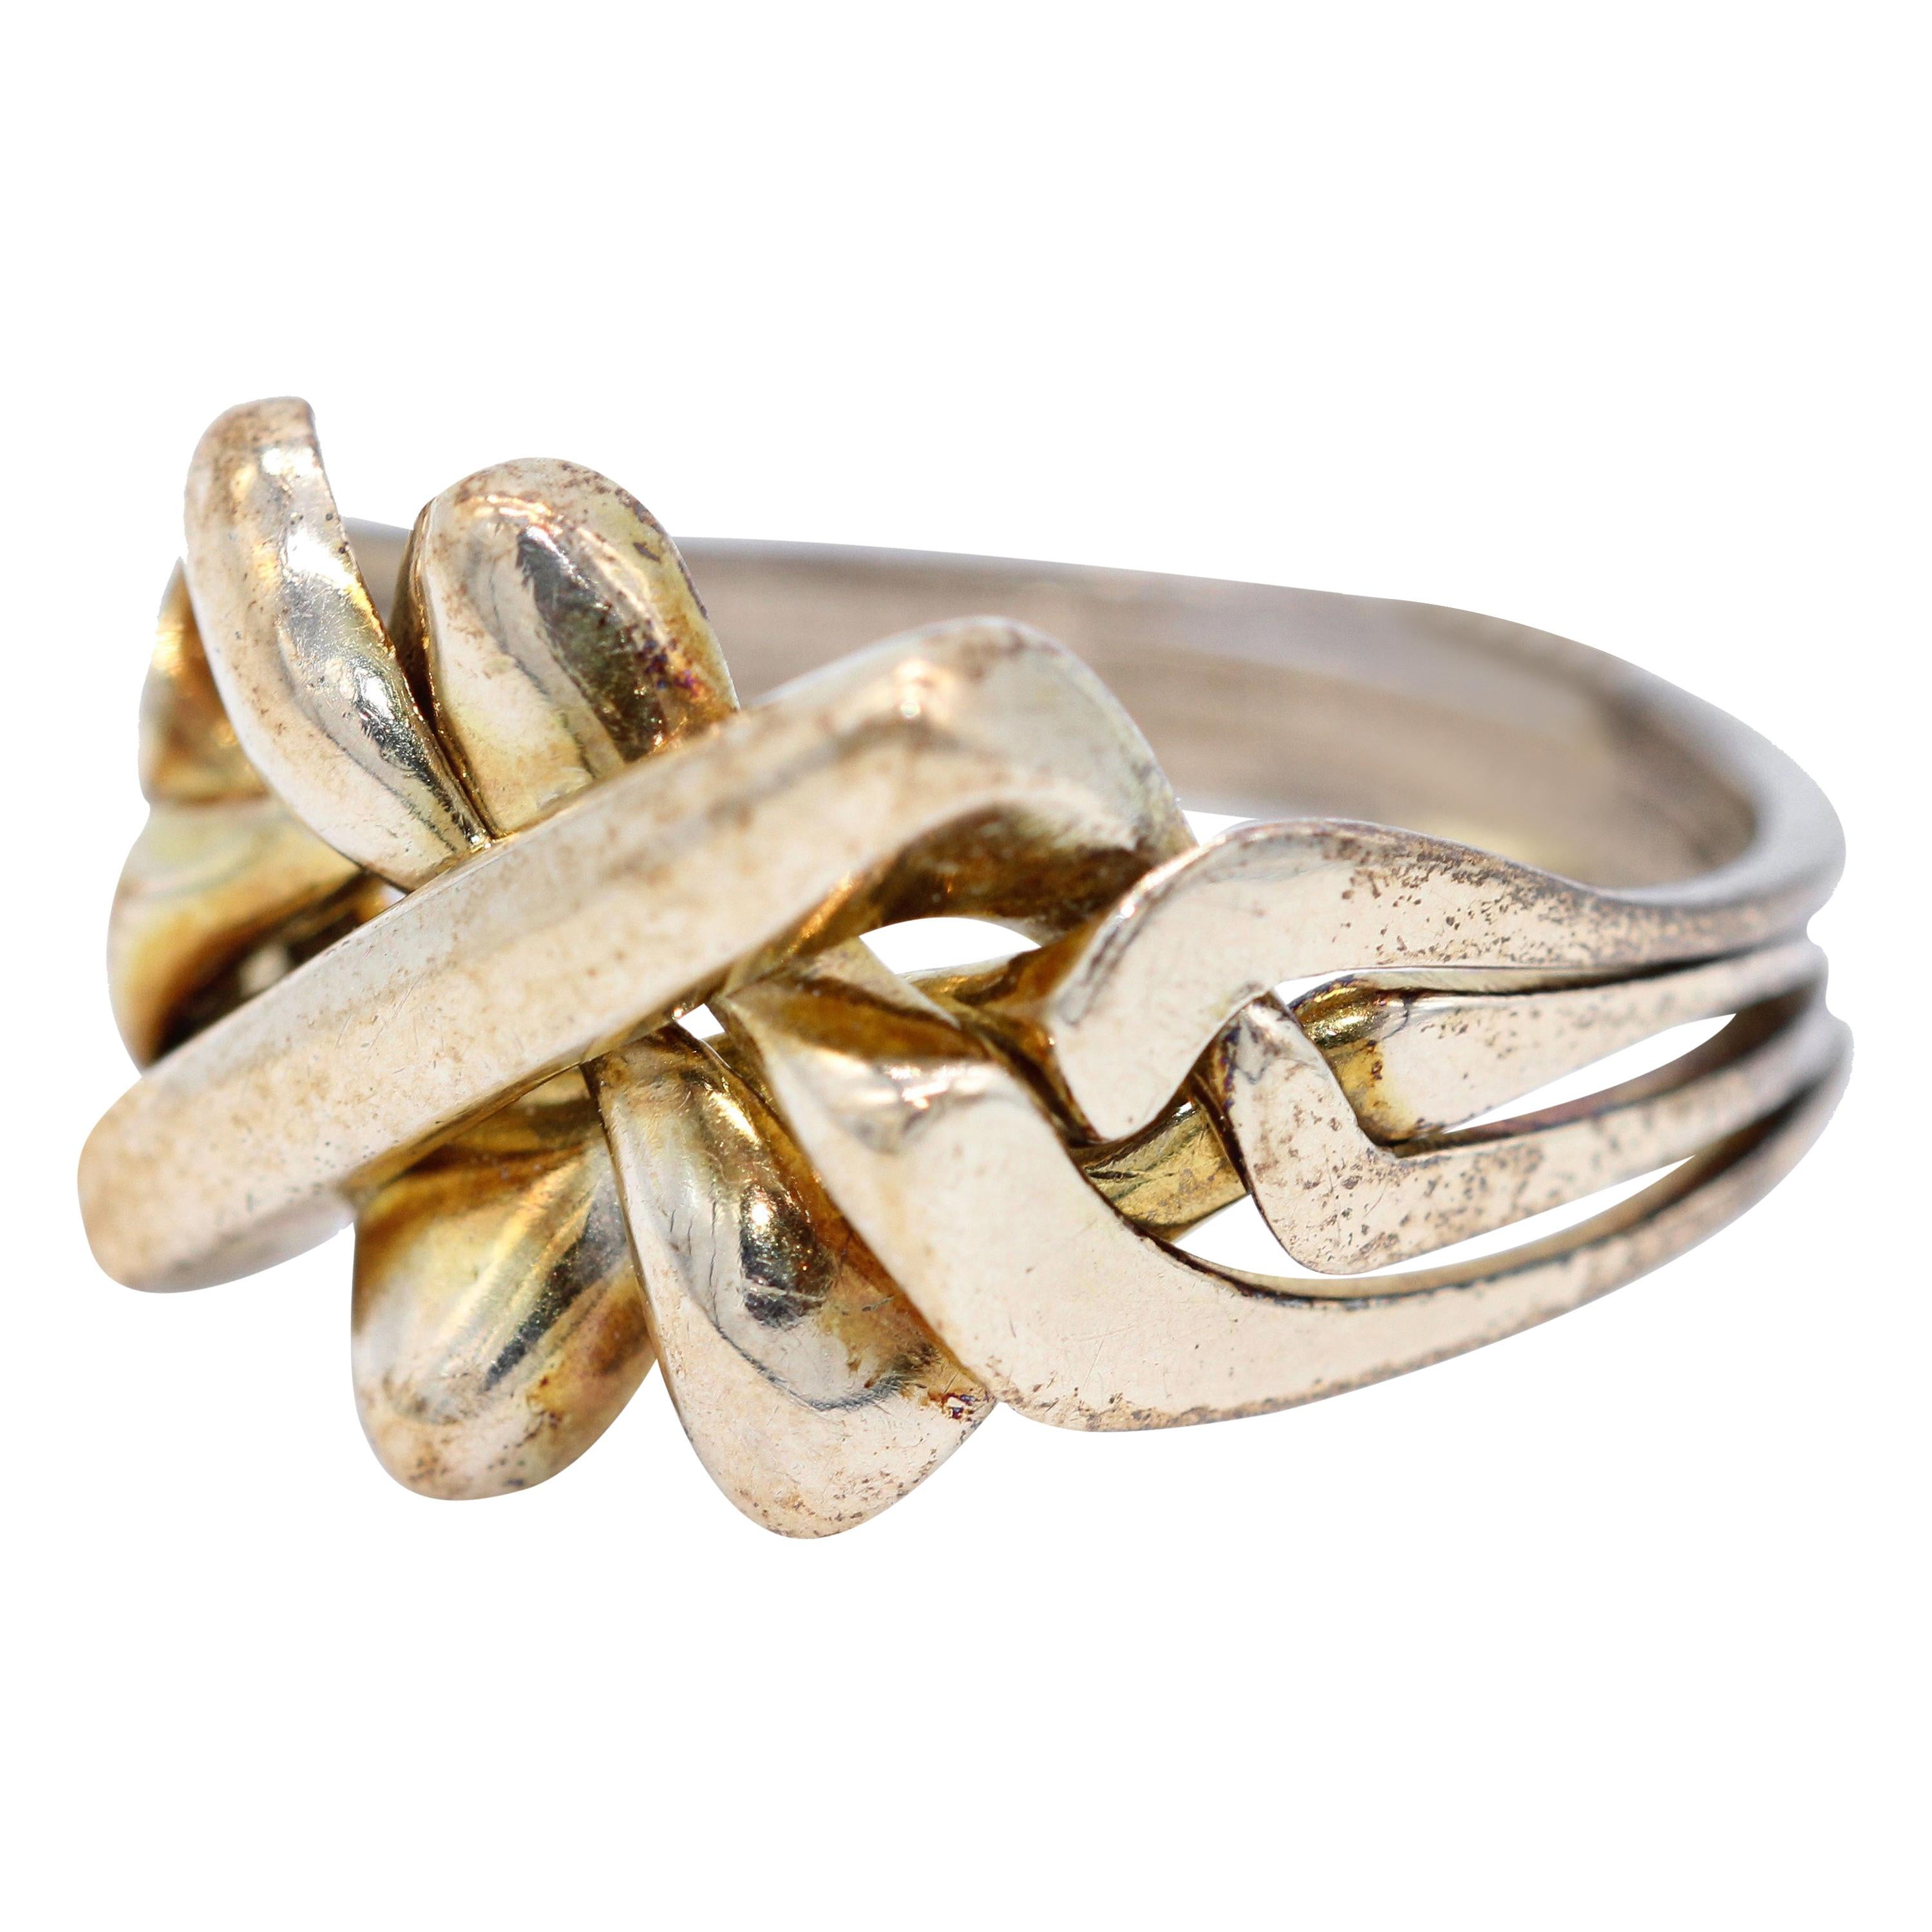 9 Kt Gold Gentleman's Four Strand Puzzle Ring